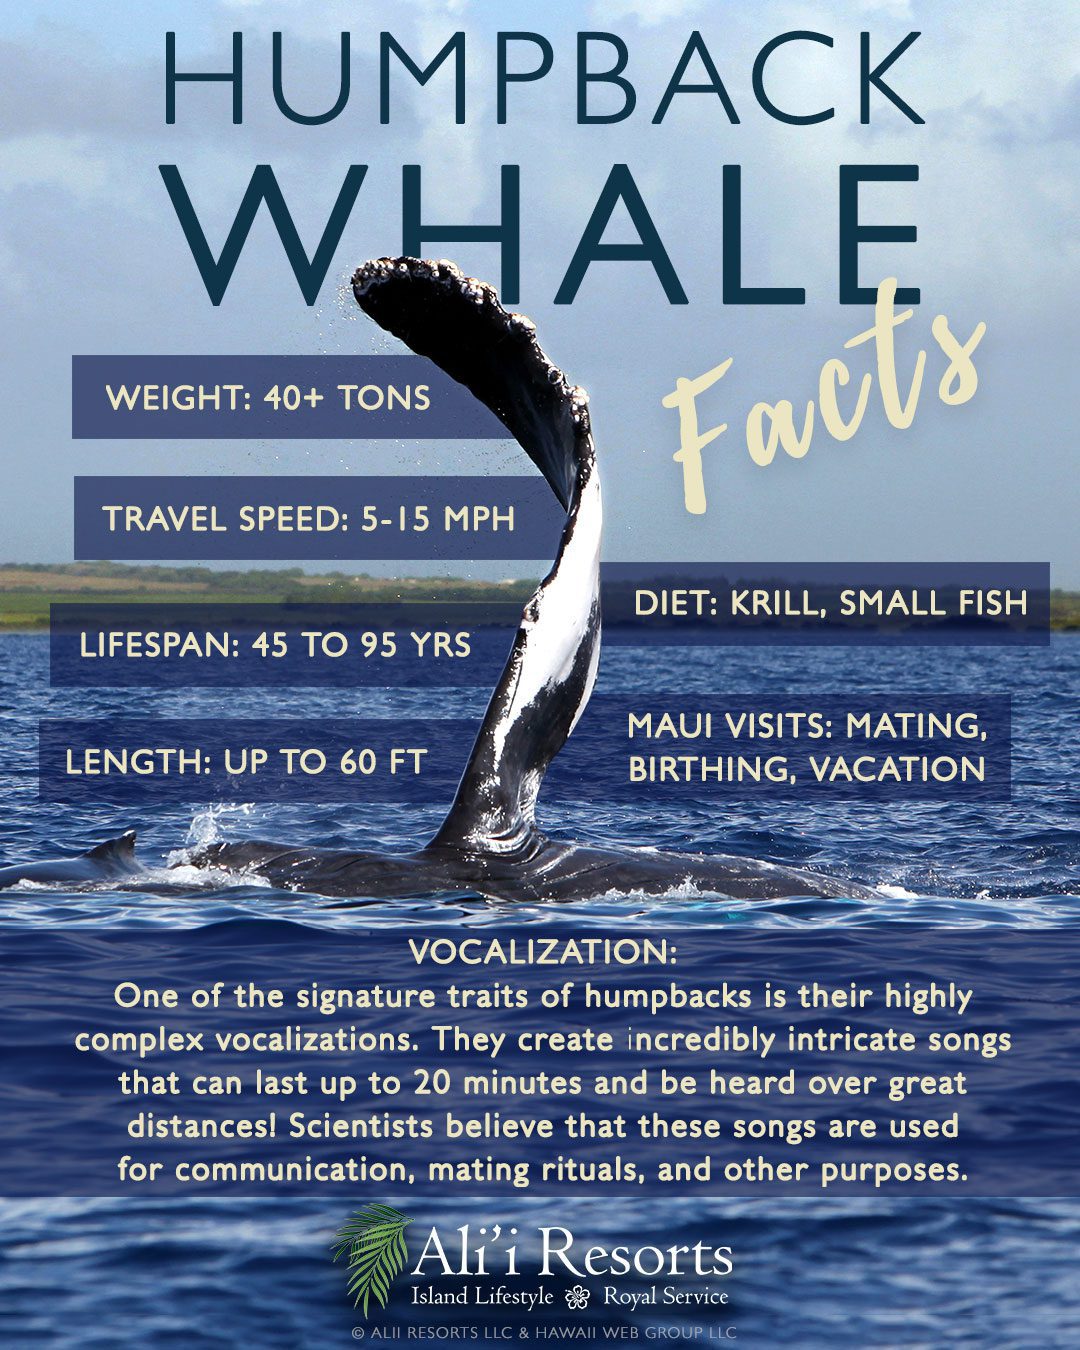 Humpback whale facts infographic